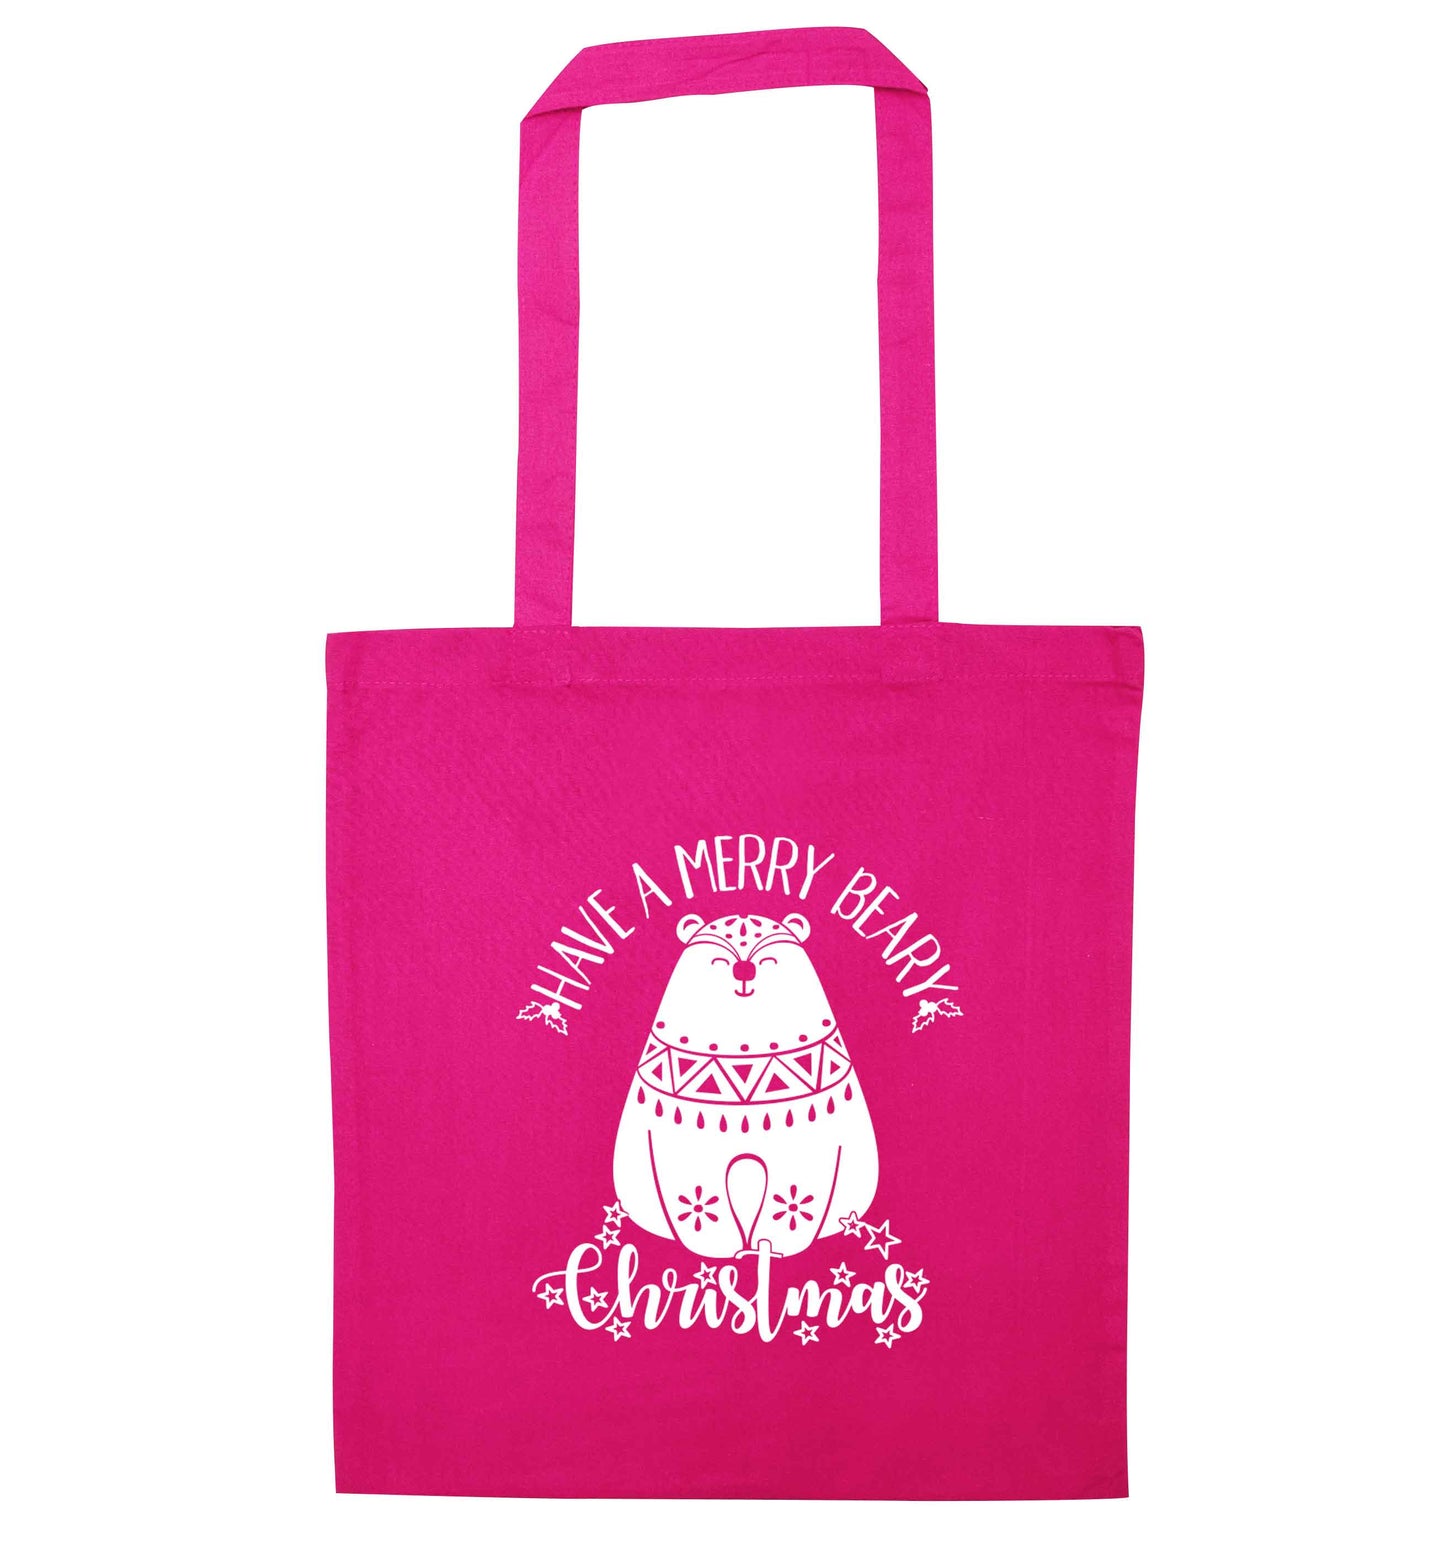 Have a merry beary Christmas pink tote bag